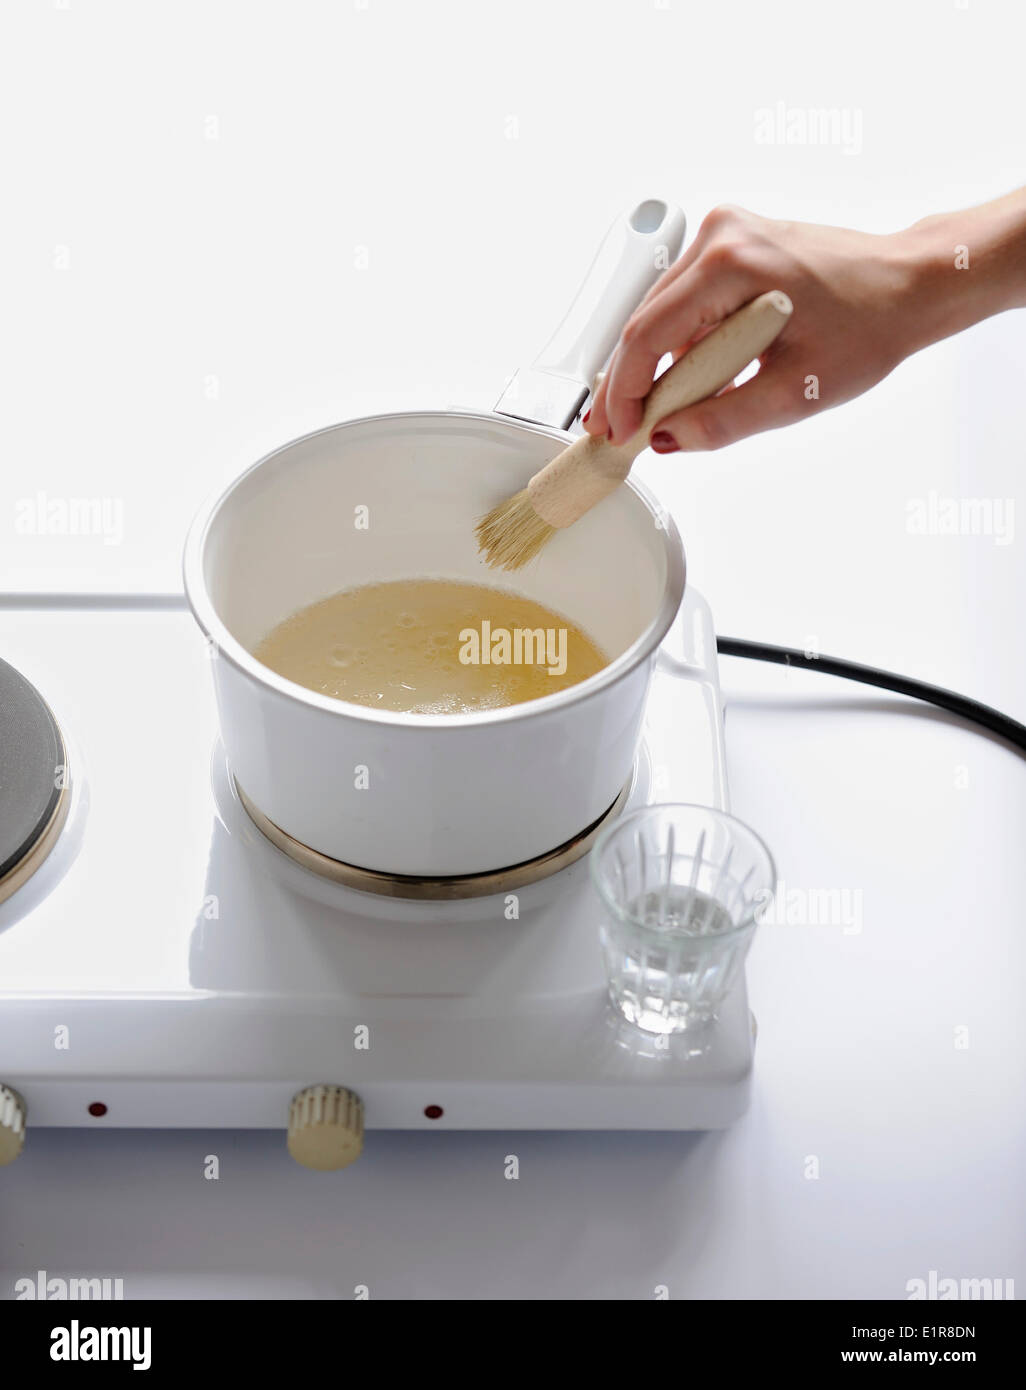 Wetting the sides of the saucepan with water Stock Photo